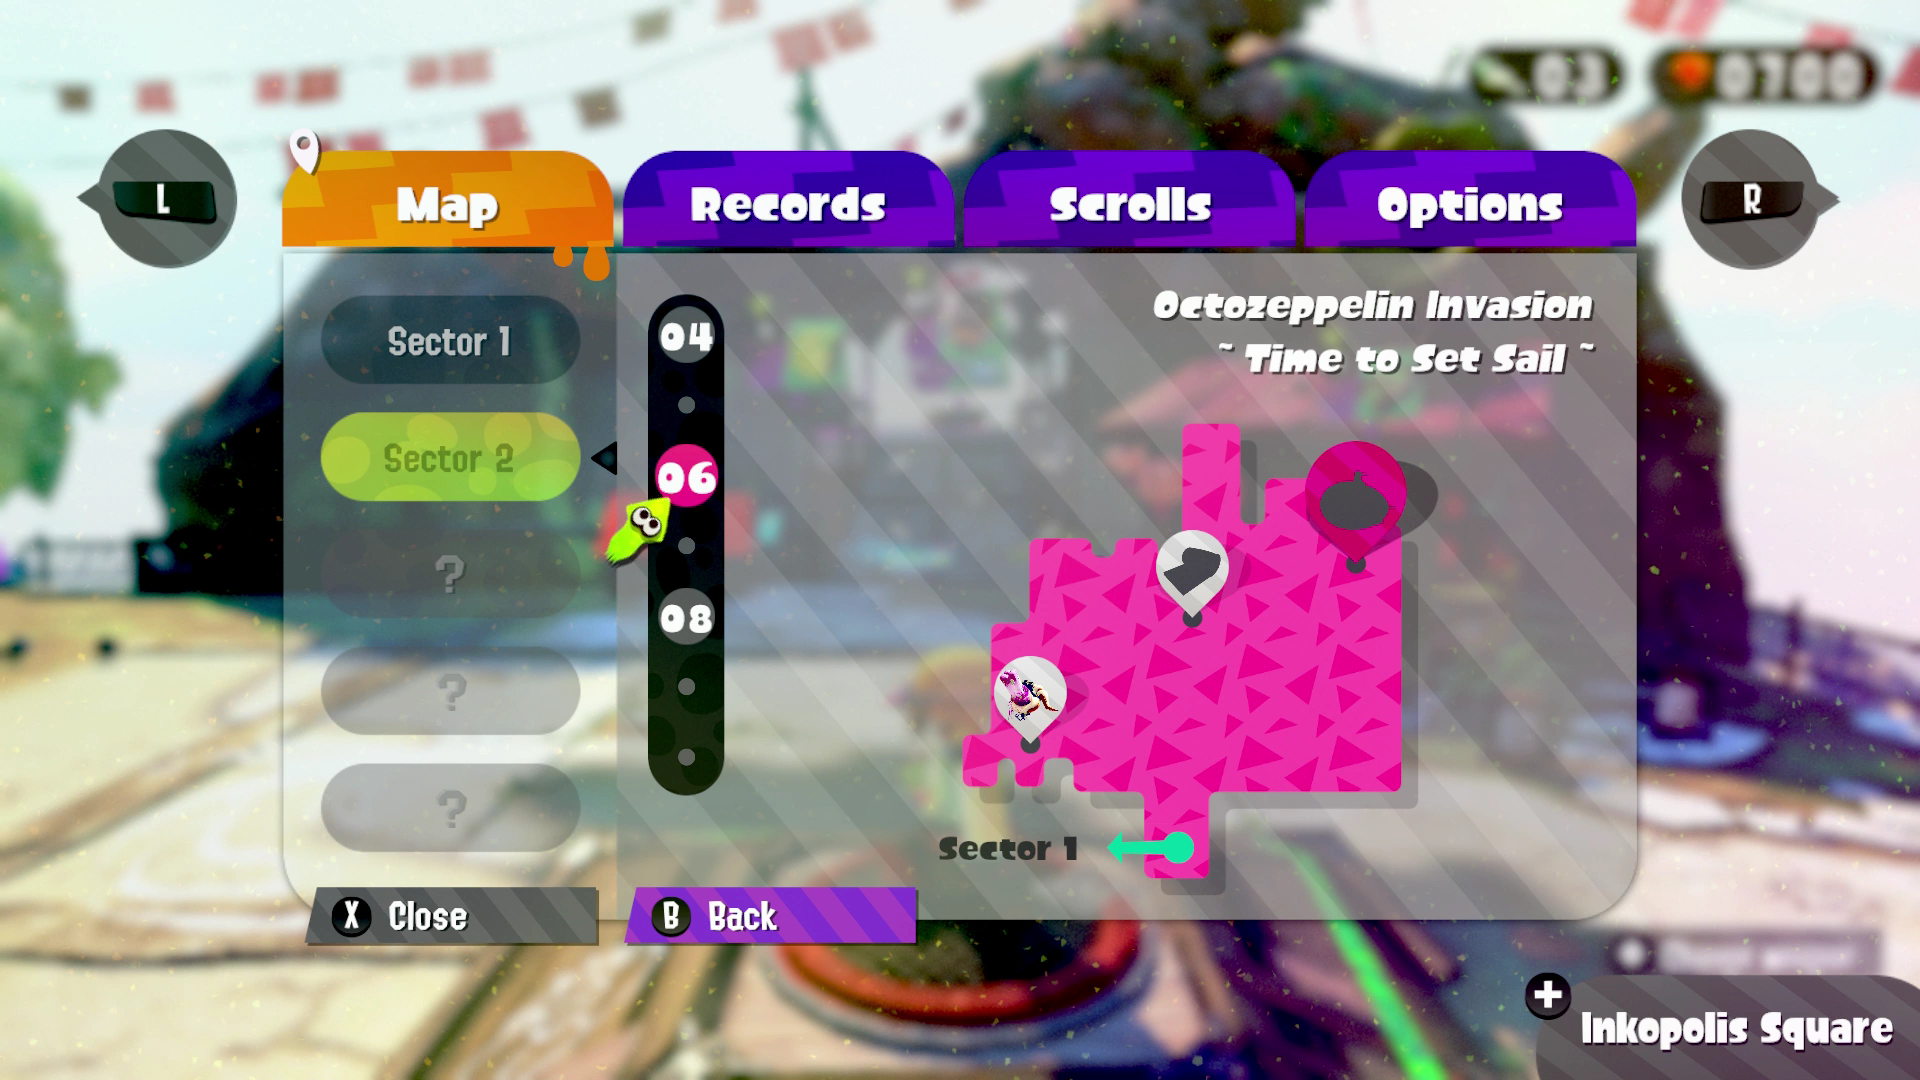 How To Farm EXP Tickets In Splatoon 2